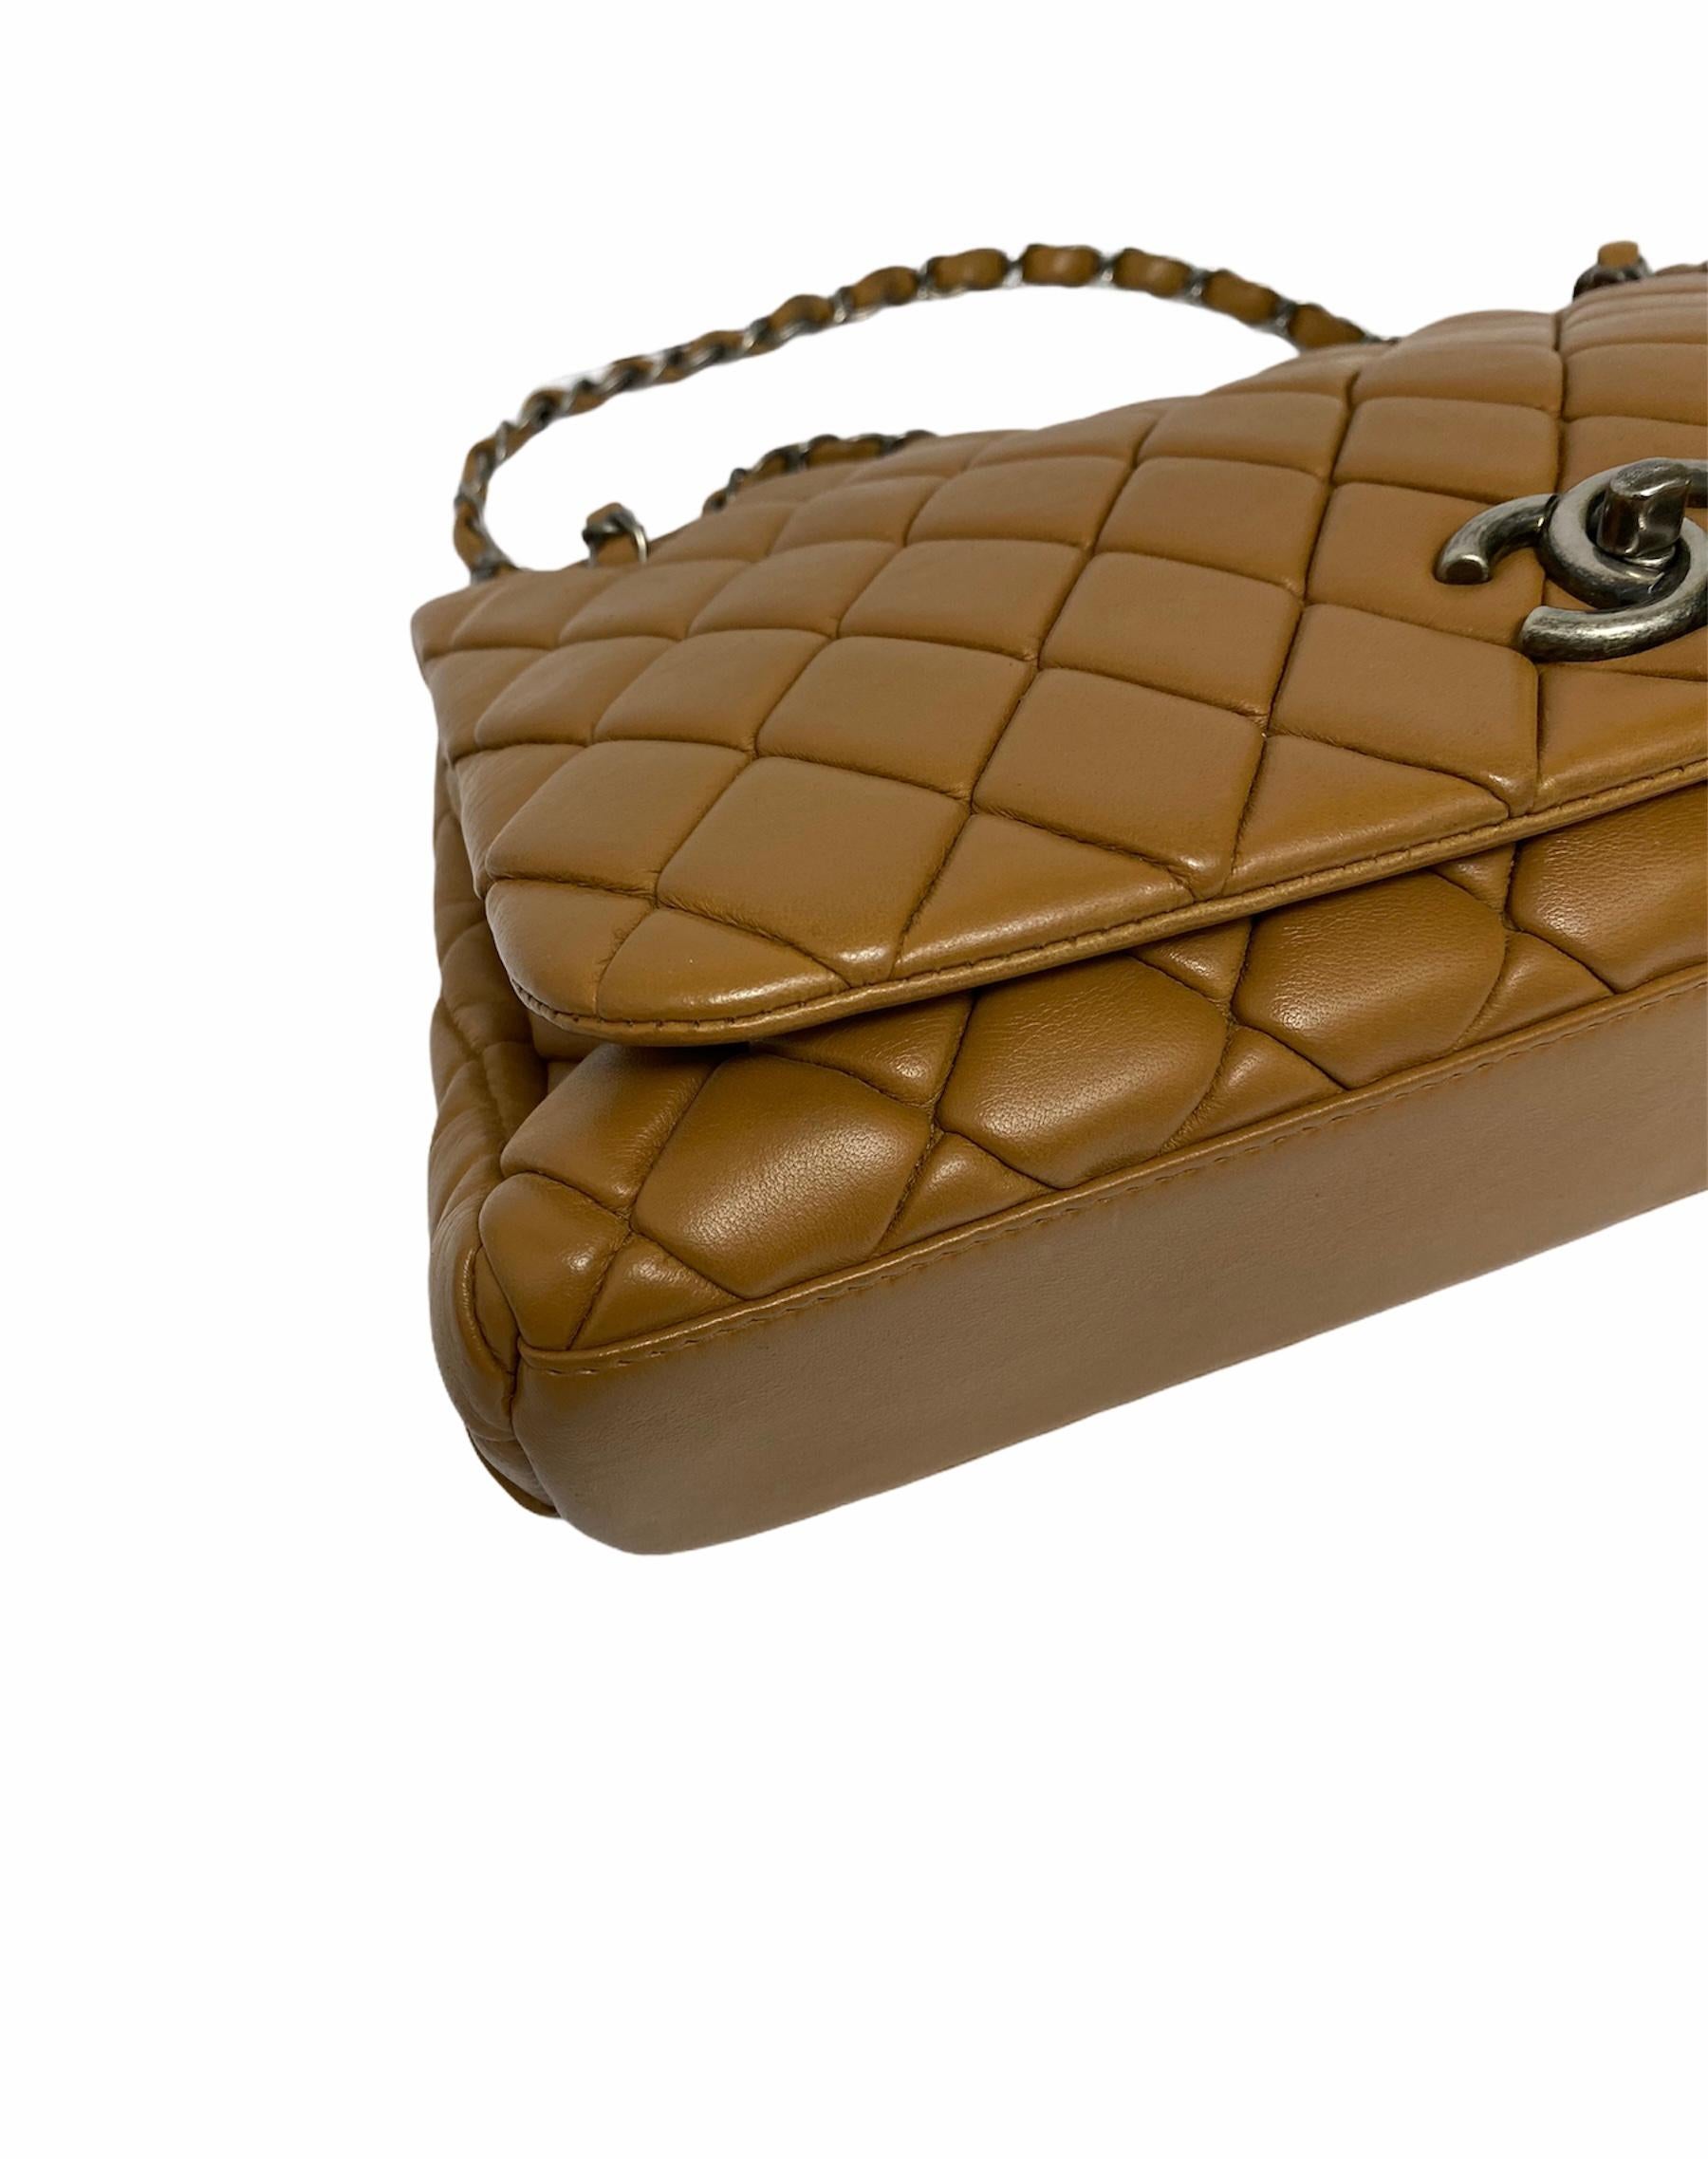 Chanel Flap Bag in Brown Leather with Silver Hardware 2